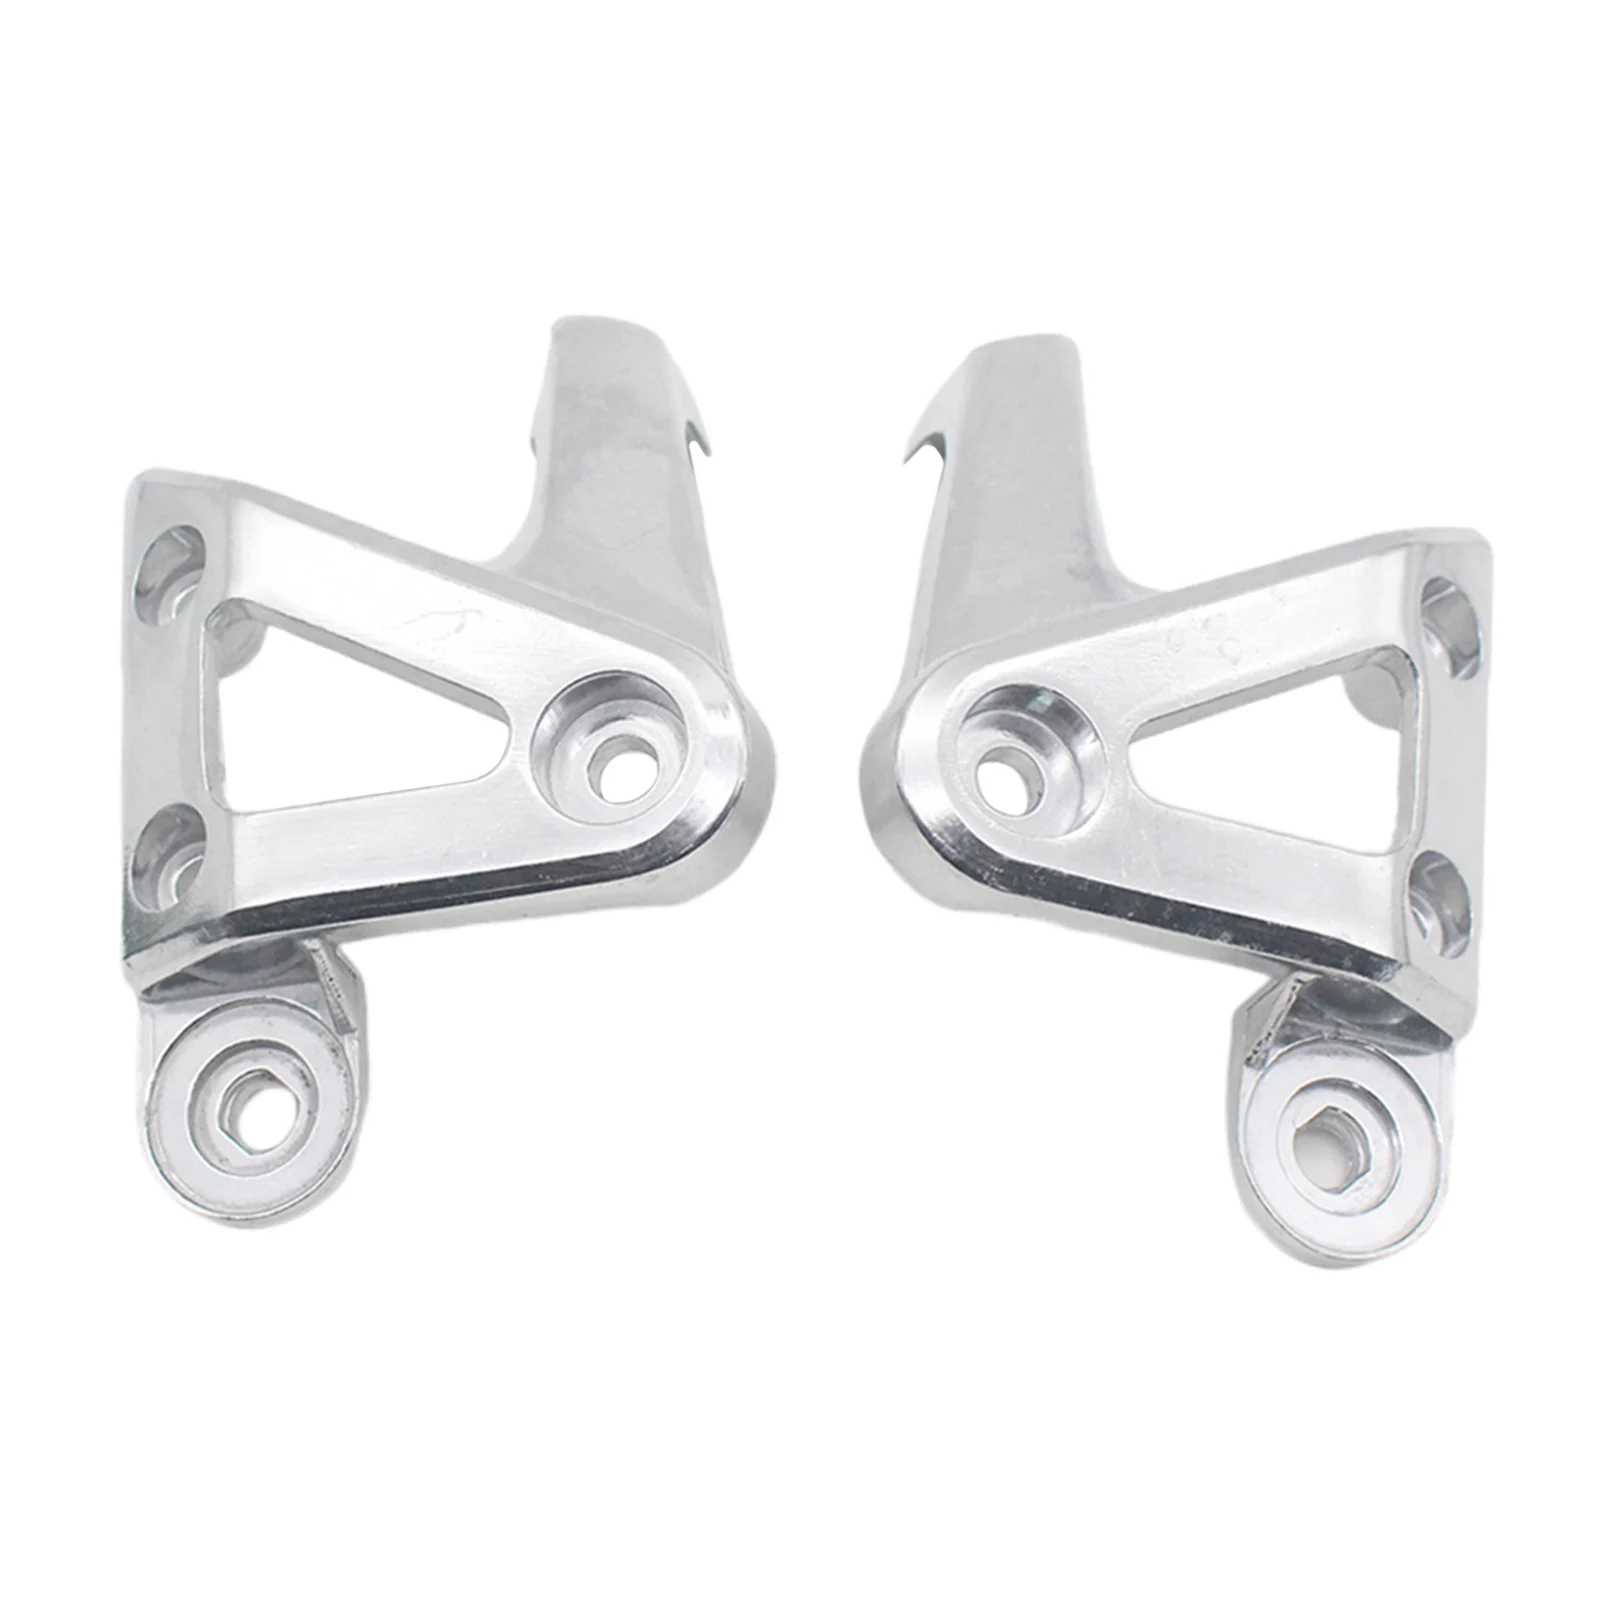 1 Set Alloy Motorcycles Headlight Mount Holders Brackets for Honda CB400 VTEC 1/2/3 1999-2008 Motorcycle Parts Accessories